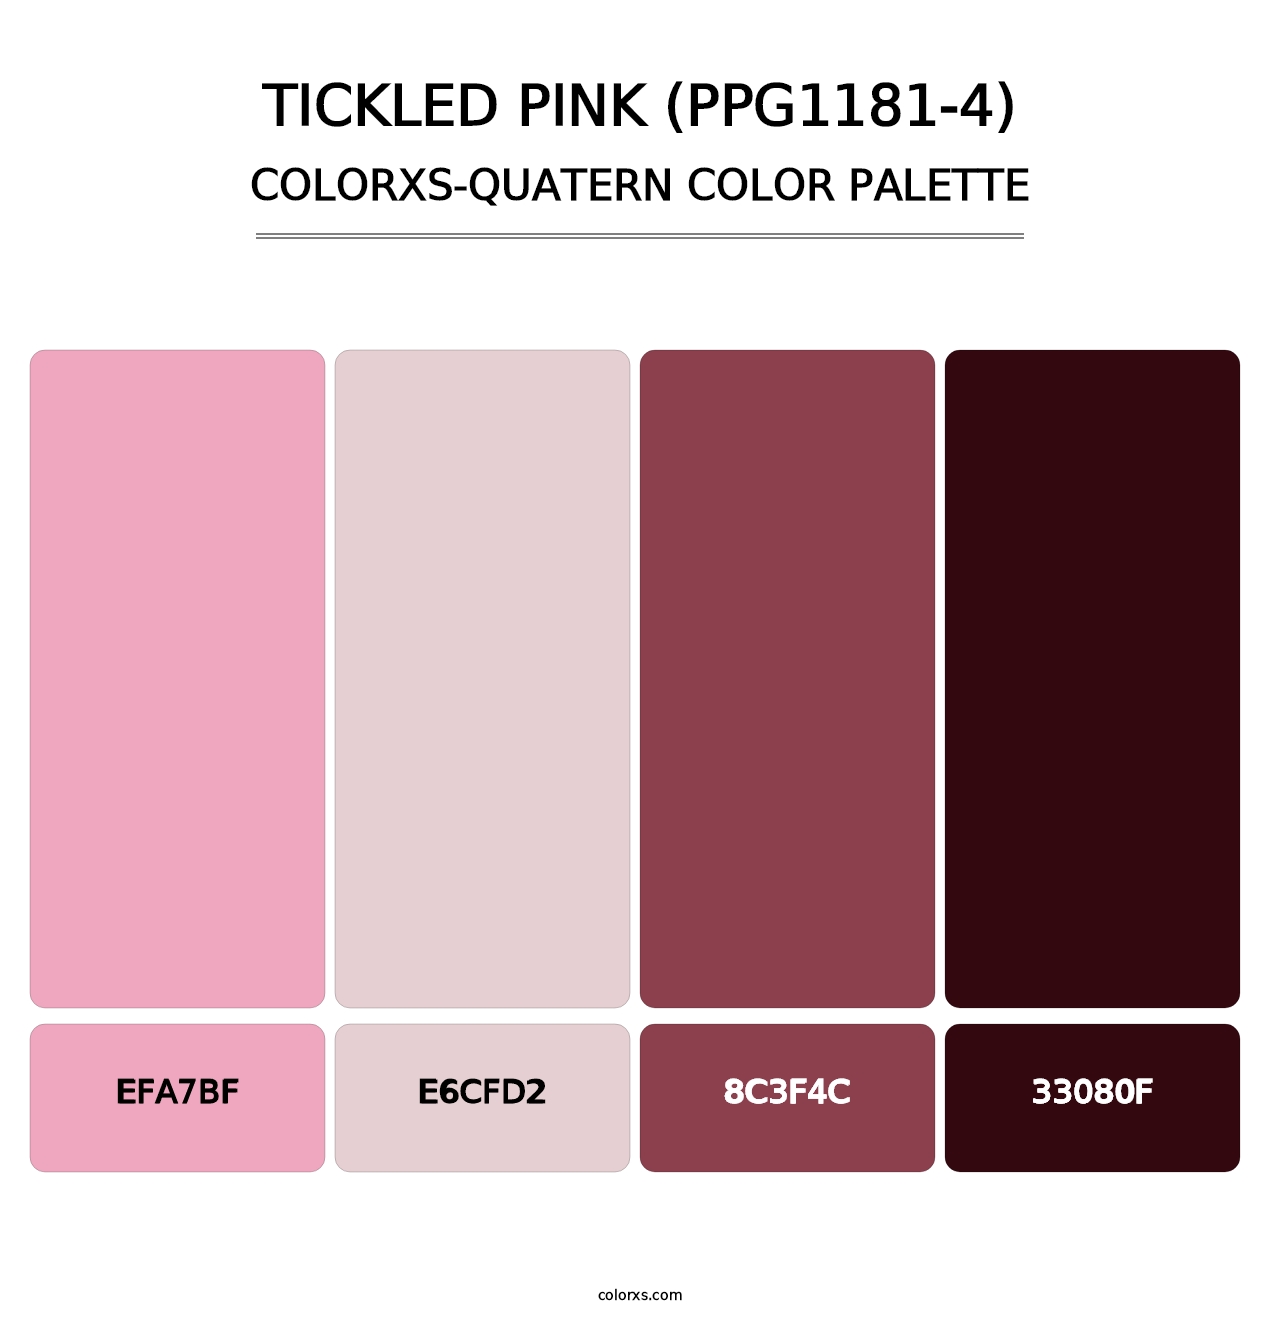 Tickled Pink (PPG1181-4) - Colorxs Quatern Palette